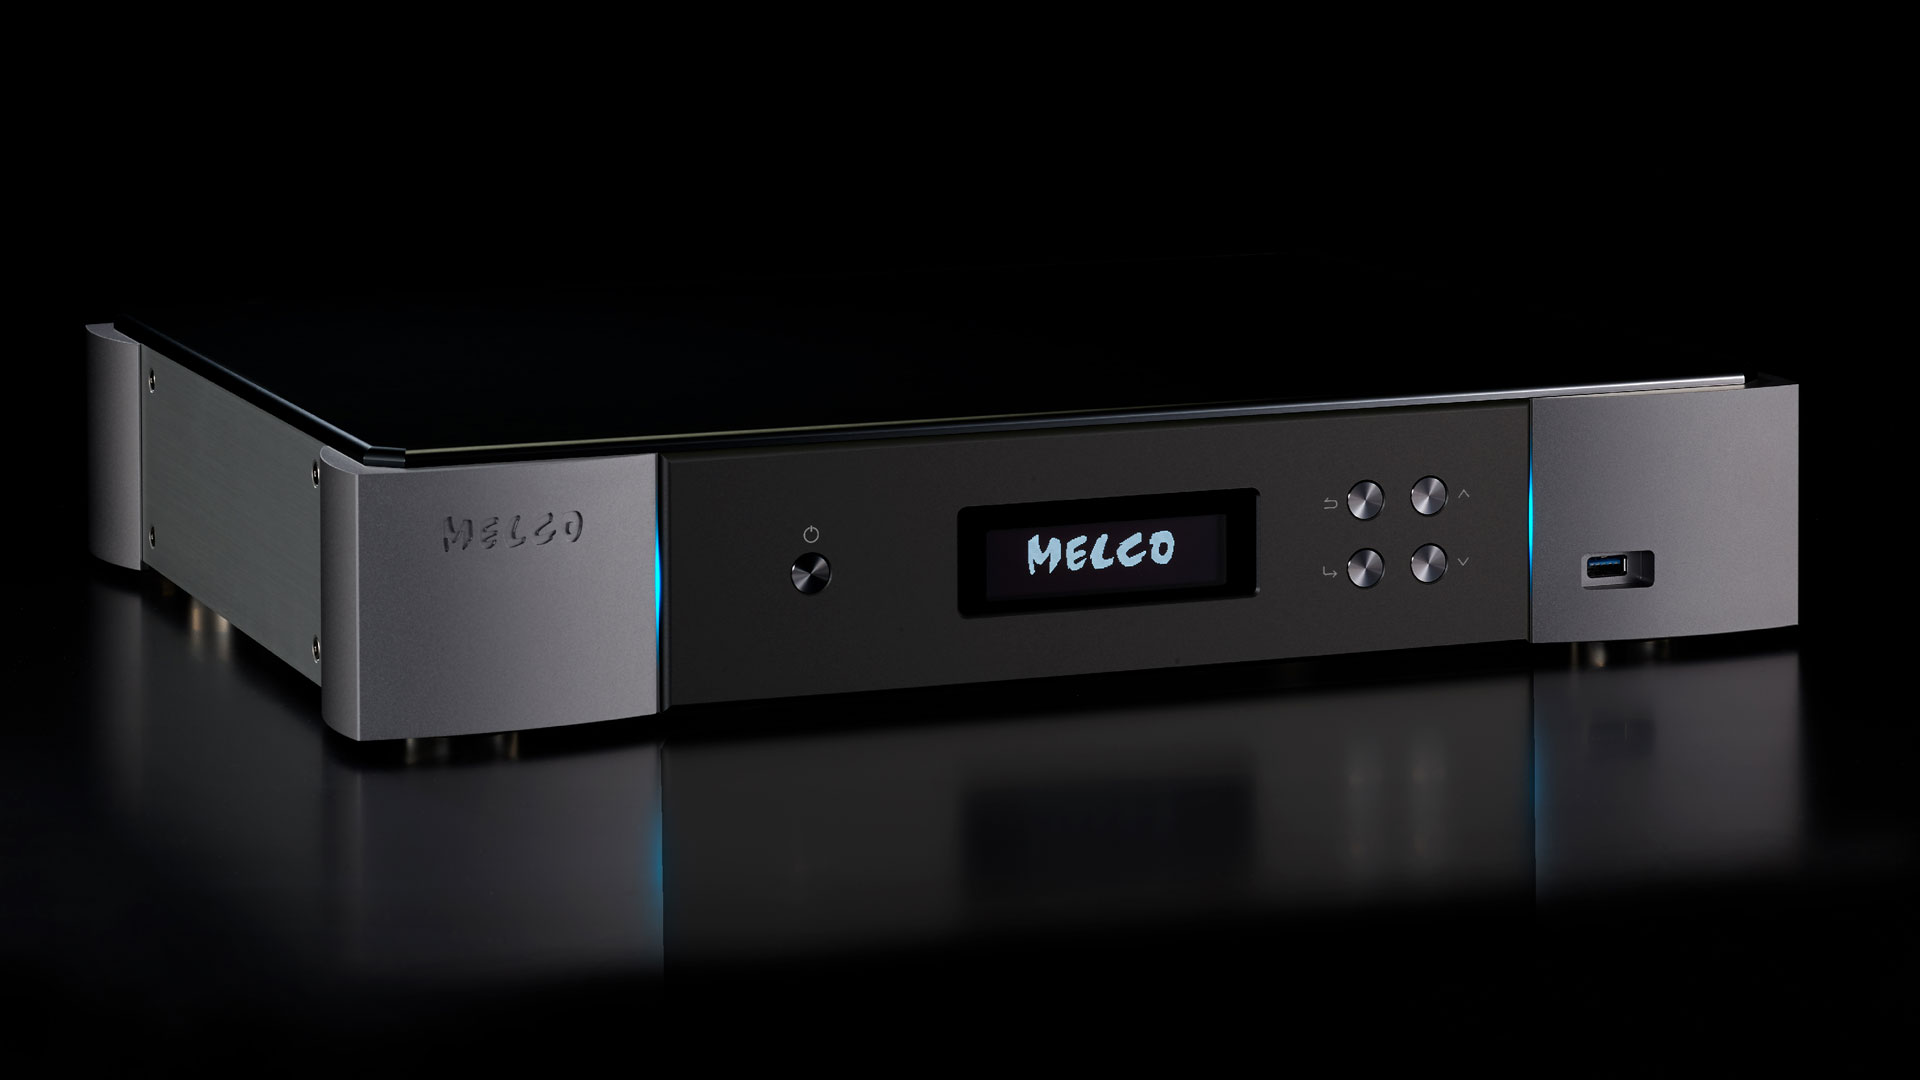 New music server Melco N1-S38 (Image Credit: Melco)